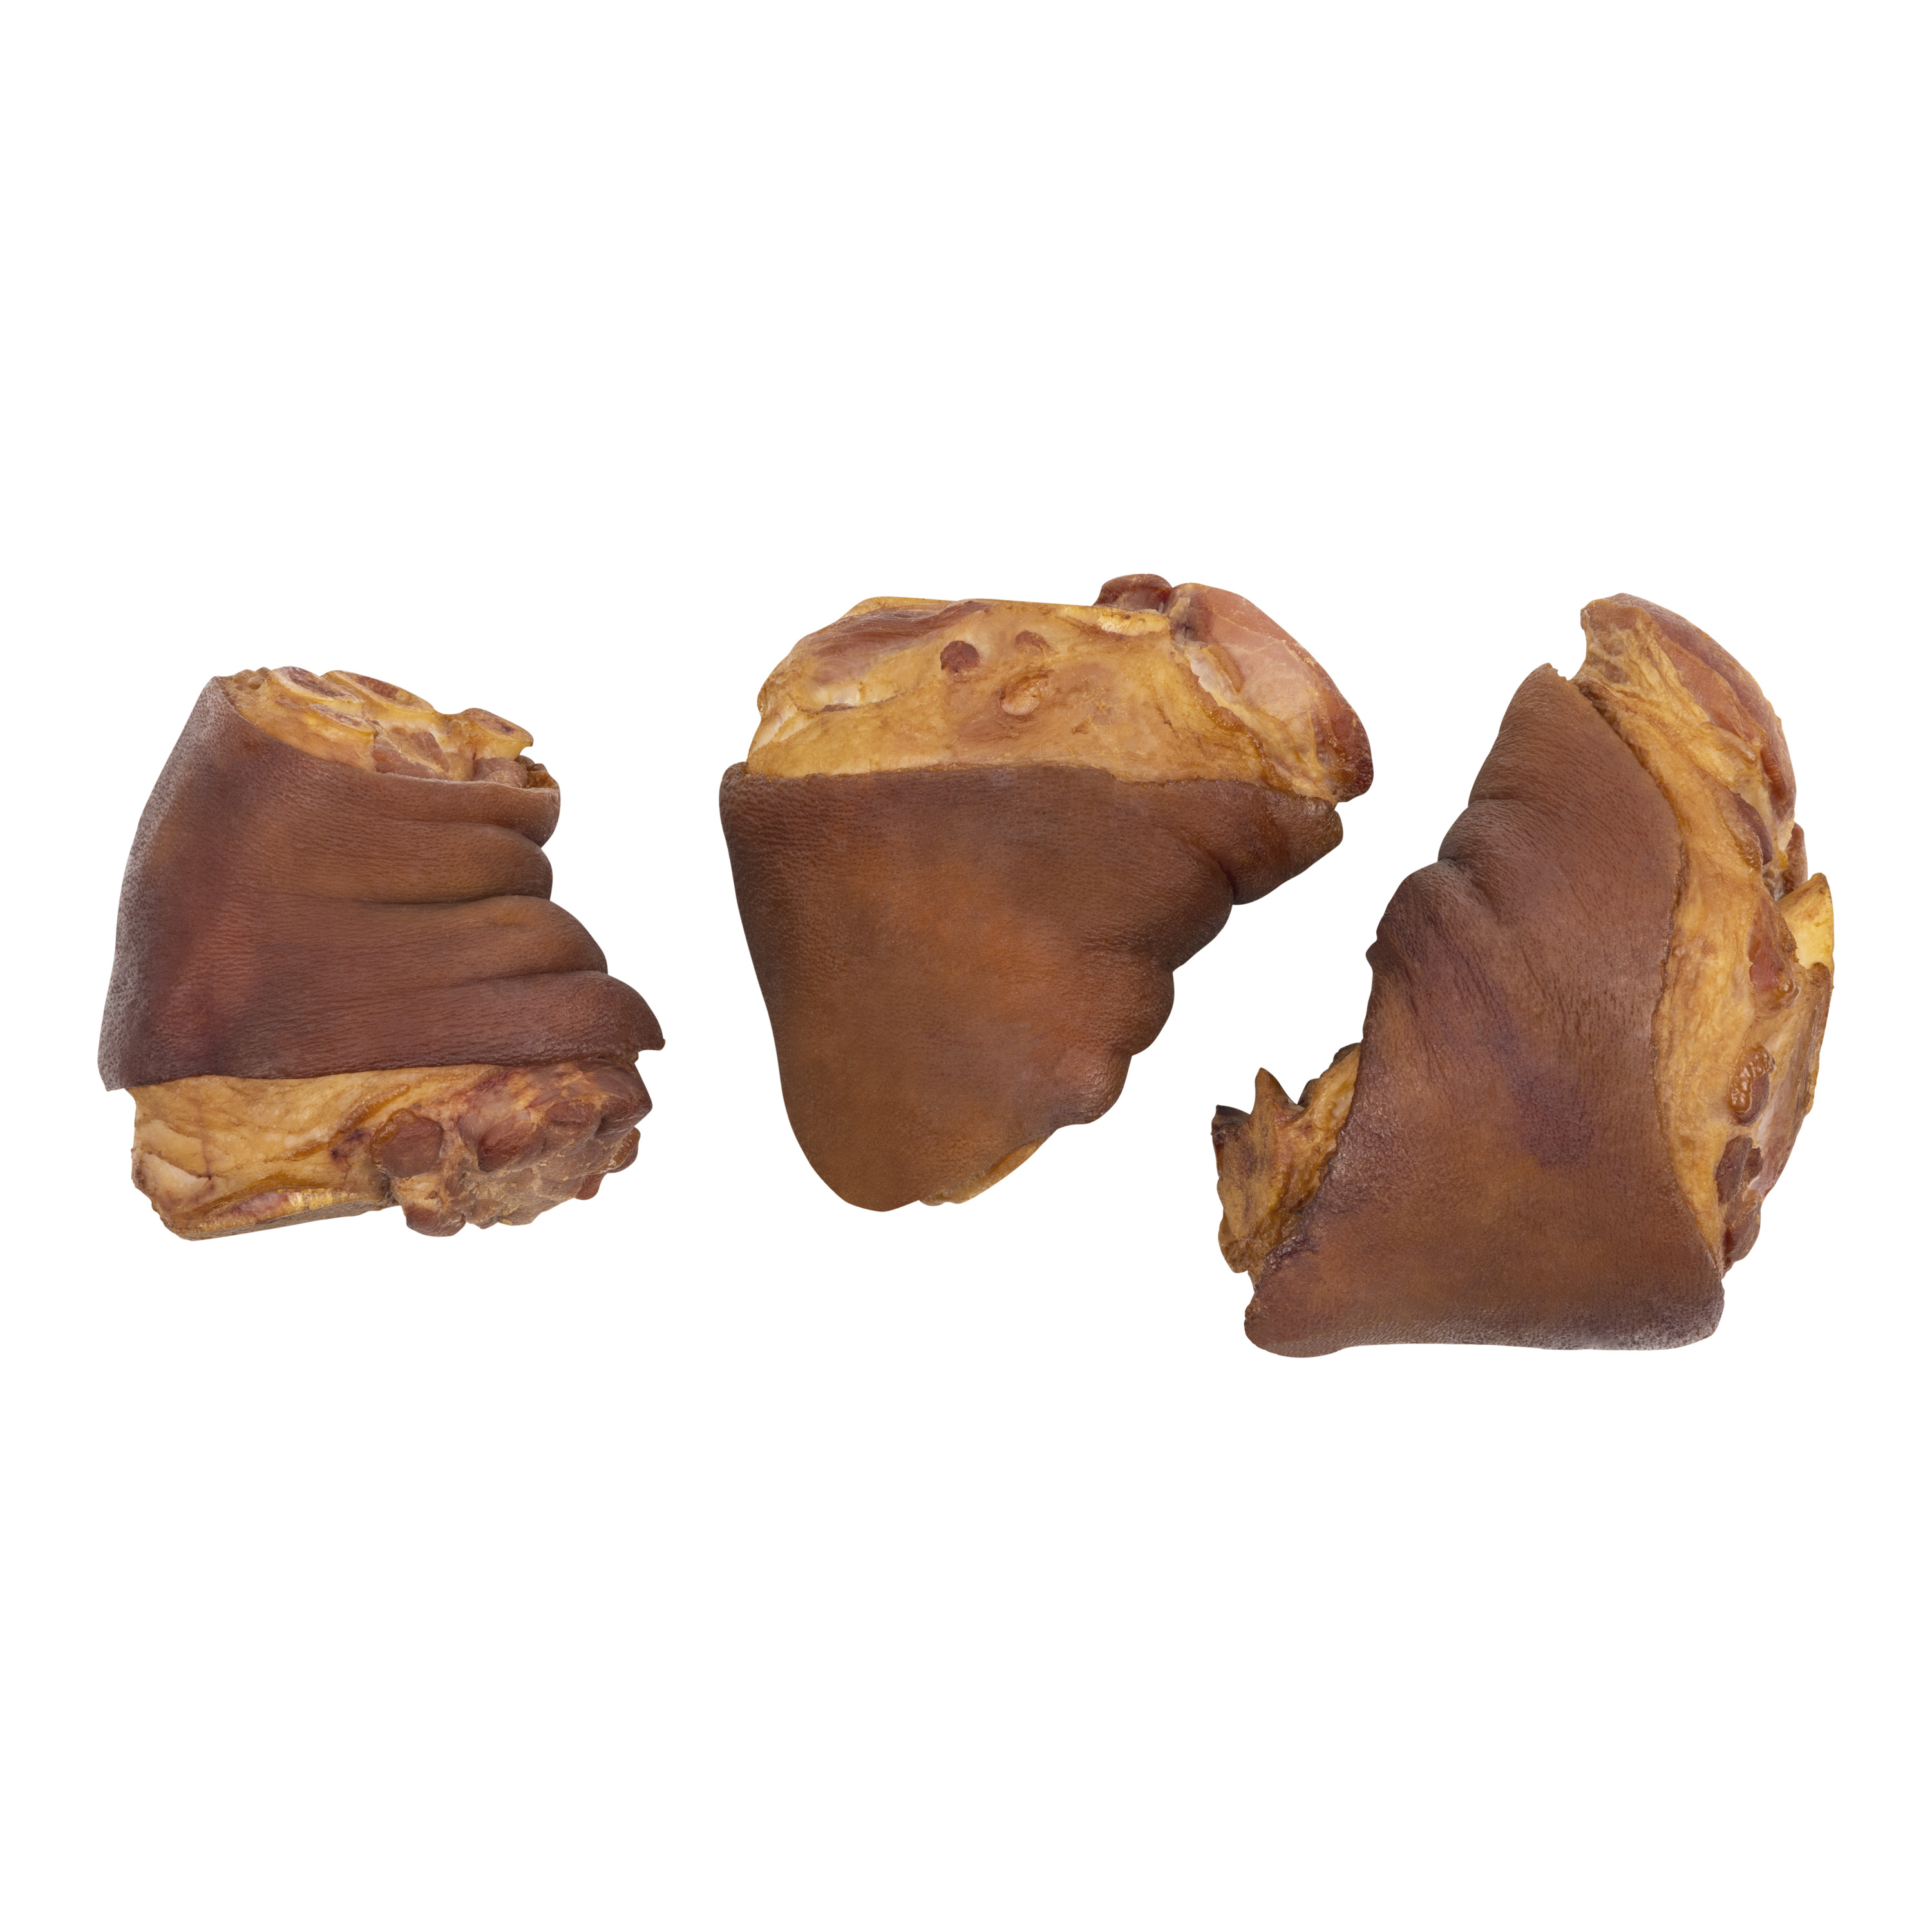 A & R Packing Co Inc. Tray, Smoked, Smoked Pork Hocks, 1.7-2.75lbs Serving Size 3oz, Protein Per Serving 14g - image 2 of 9